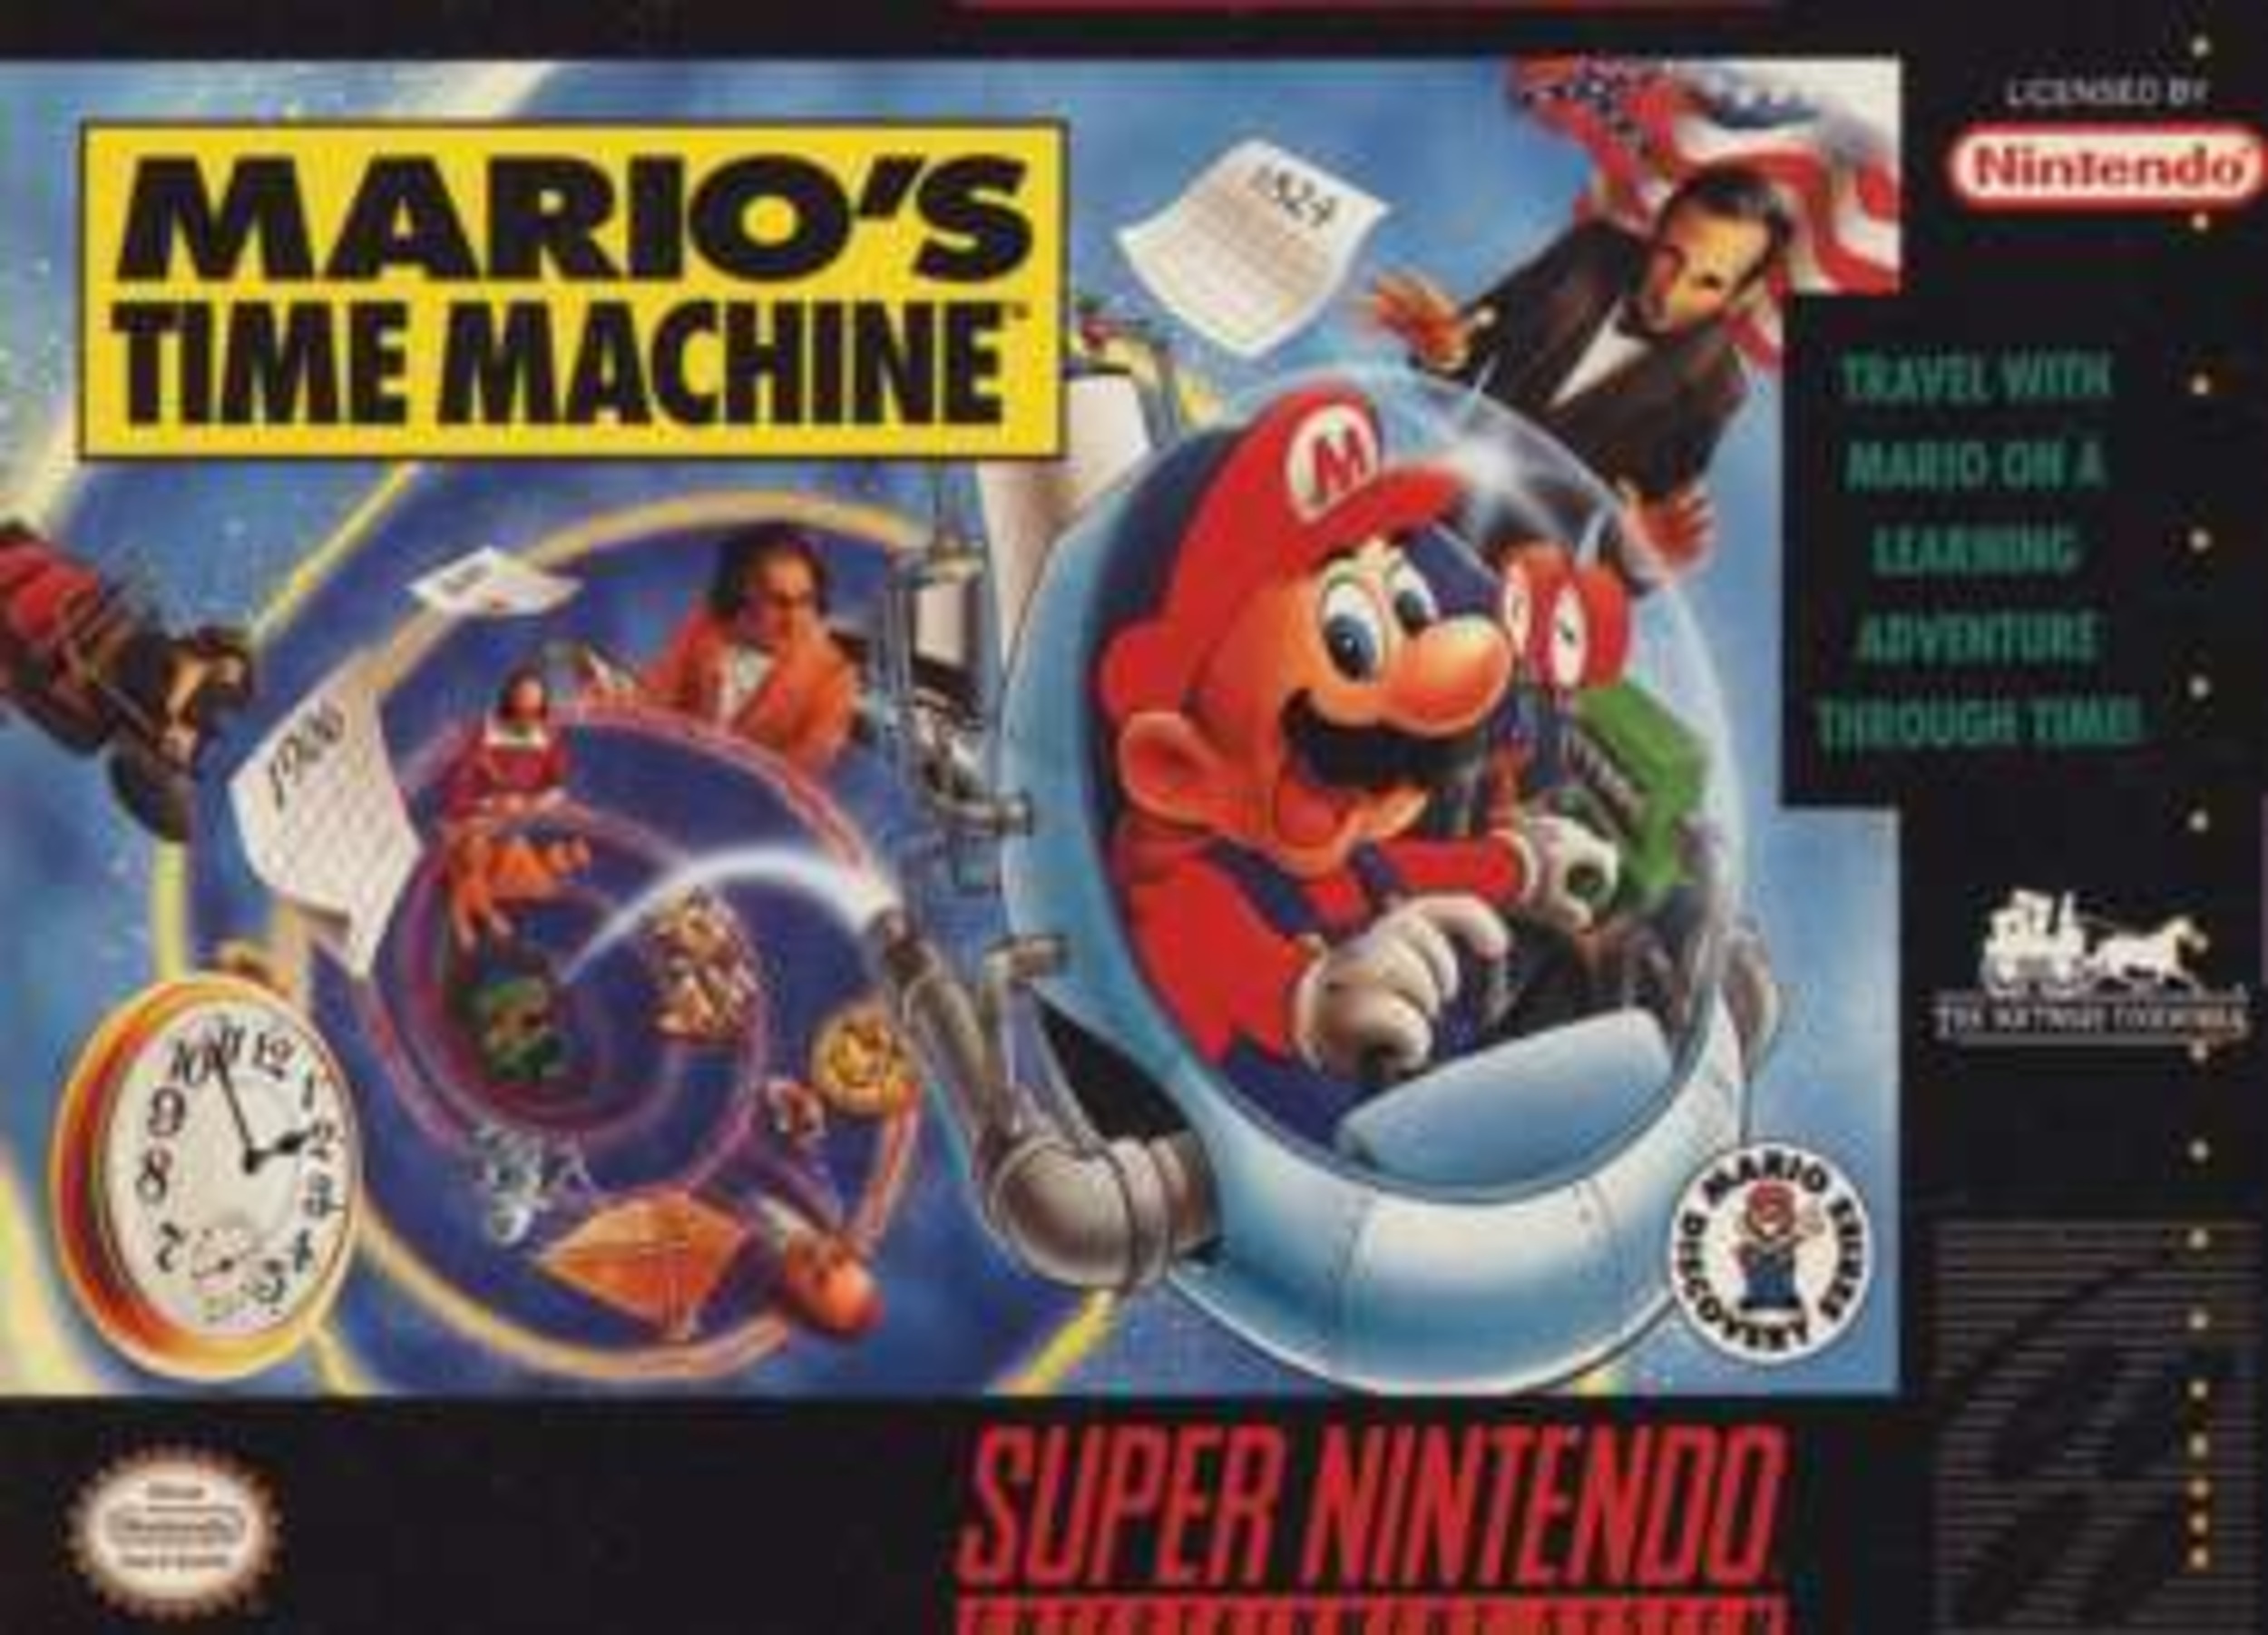 <p>The other educational game in the Mario library focused on history knowledge because nothing makes for a better Mario game than remembering the dates of human tragedies.<br><br>This time, players control Mario, who must go back in time to rescue his pal Yoshi and retrieve vital historical artifacts that Bowser has stolen, forever changing the breadth of human history. It's basically <em>Where In Time Is Carmen Sandiego?</em> if the game didn't have the fun of obtaining character traits of the thief to get a warrant and if the end goal was to save a dinosaur that can't be sated. In other words, boring. </p><p><a href='https://www.msn.com/en-us/community/channel/vid-cj9pqbr0vn9in2b6ddcd8sfgpfq6x6utp44fssrv6mc2gtybw0us'>Follow us on MSN to see more of our exclusive entertainment content.</a></p>